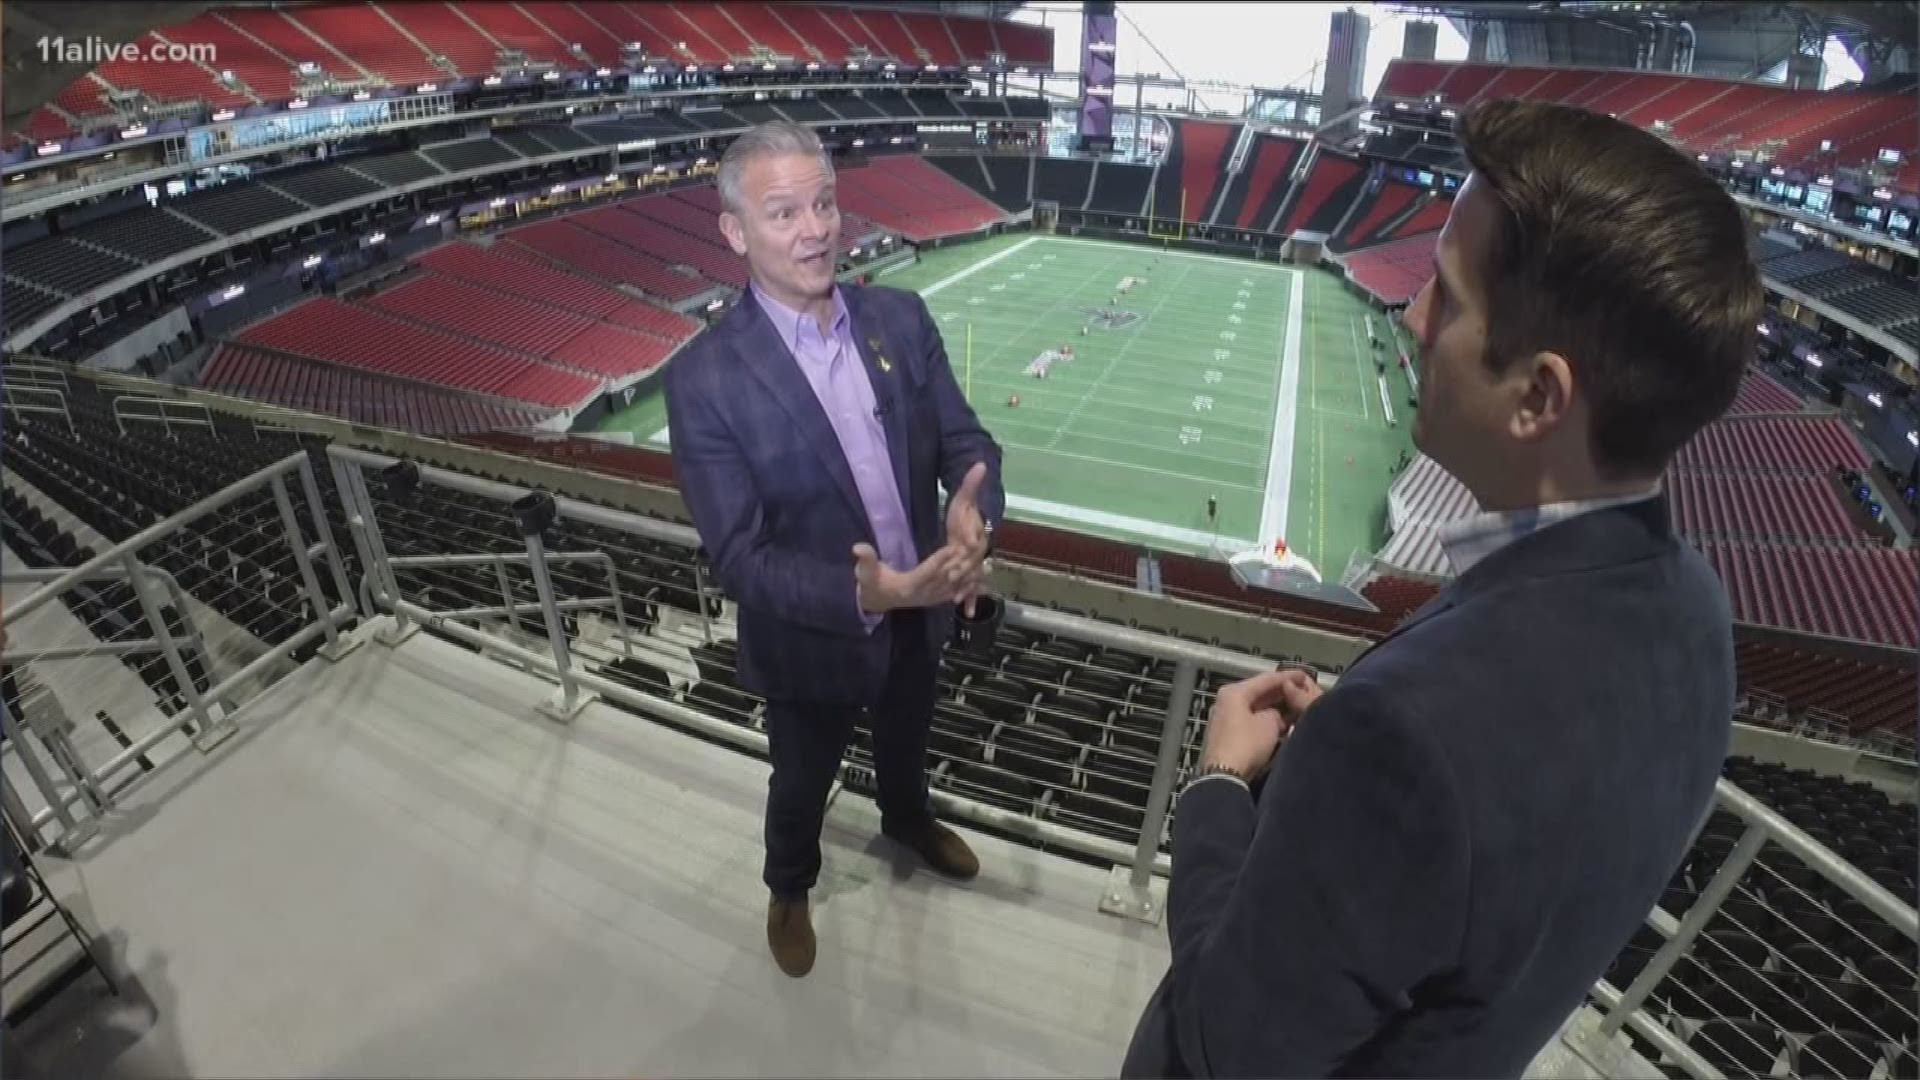 Lots of tweaks and changes are headed for Mercedes-Benz Stadium ahead of the Super Bowl. But those in the know say the new stadium is up to the task.